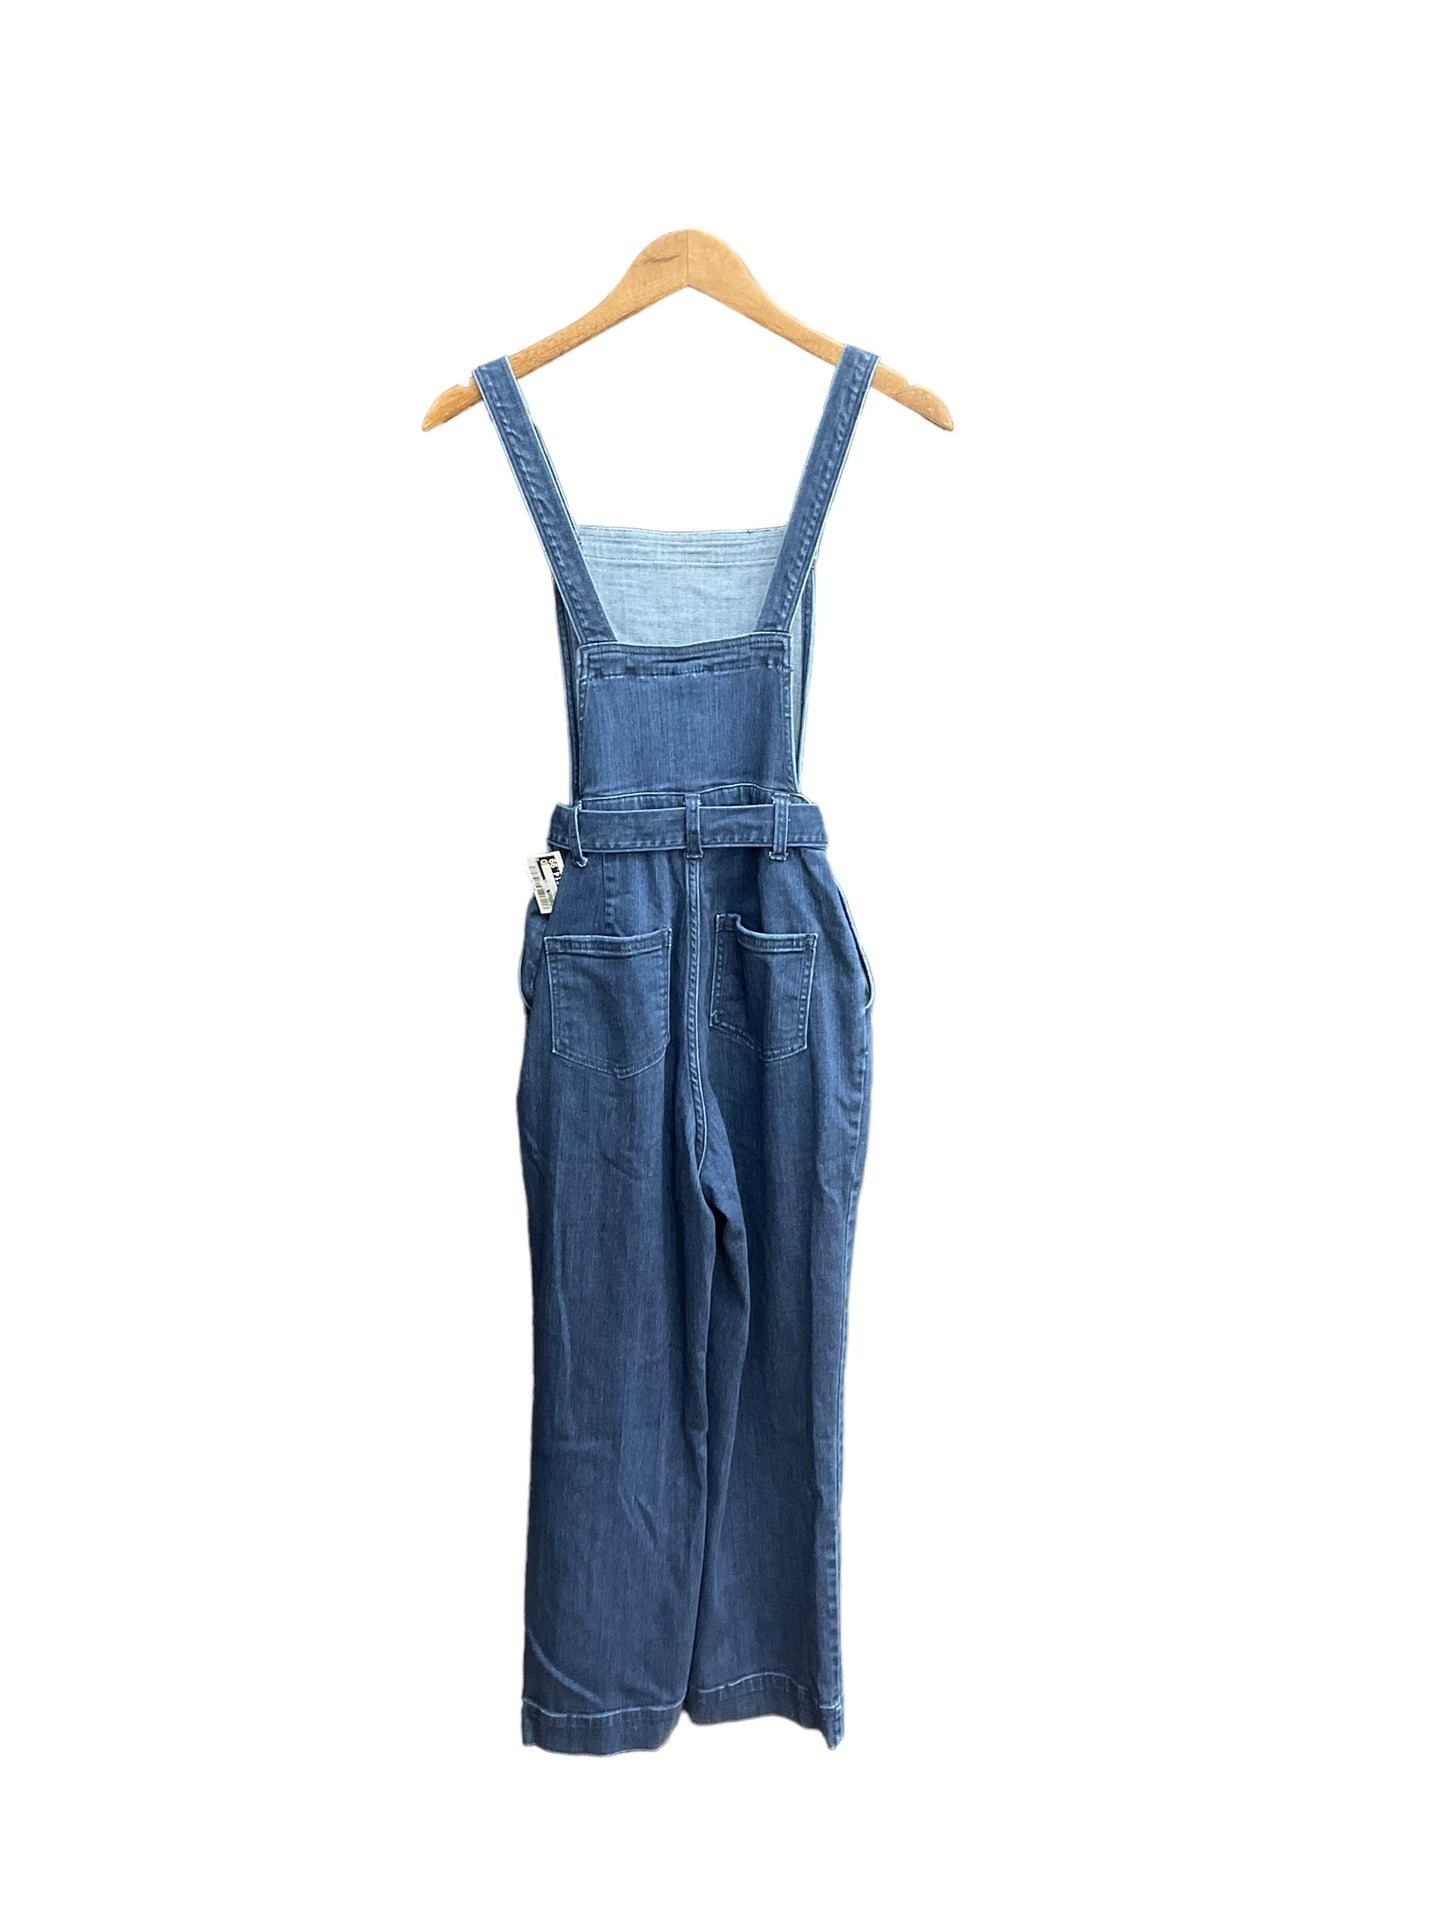 Overalls By Universal Thread  Size: S